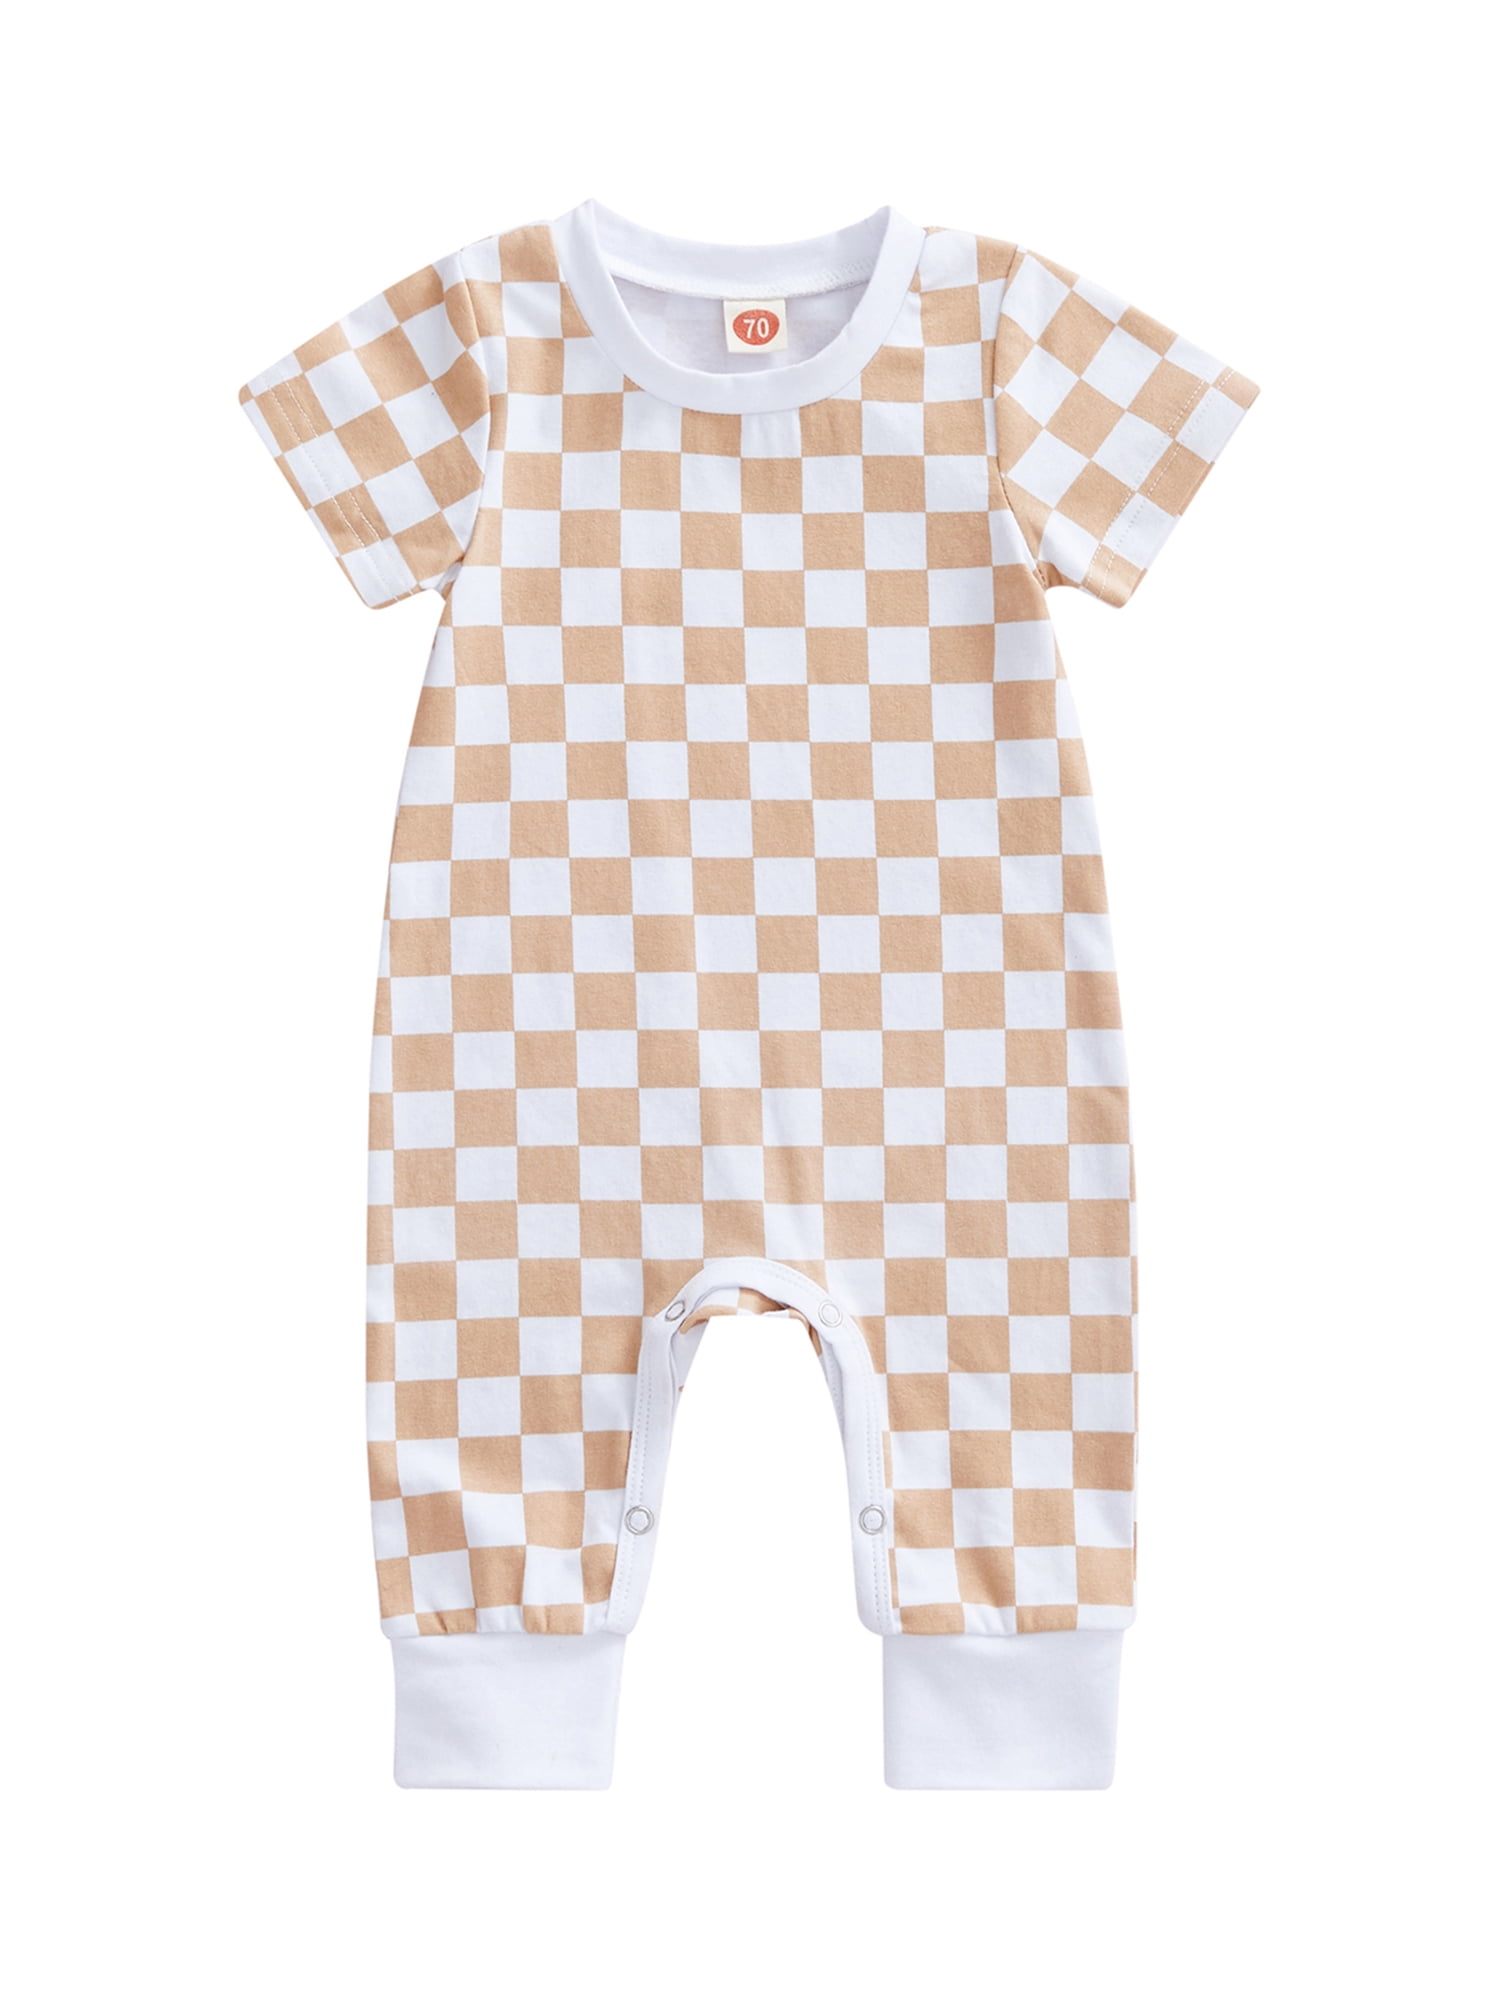 Newborn Baby Boys Jumpsuit Checkerboard Plaid Print Short Sleeve Romper  Bodysuit Playsuit Outfit Summer Clothes 